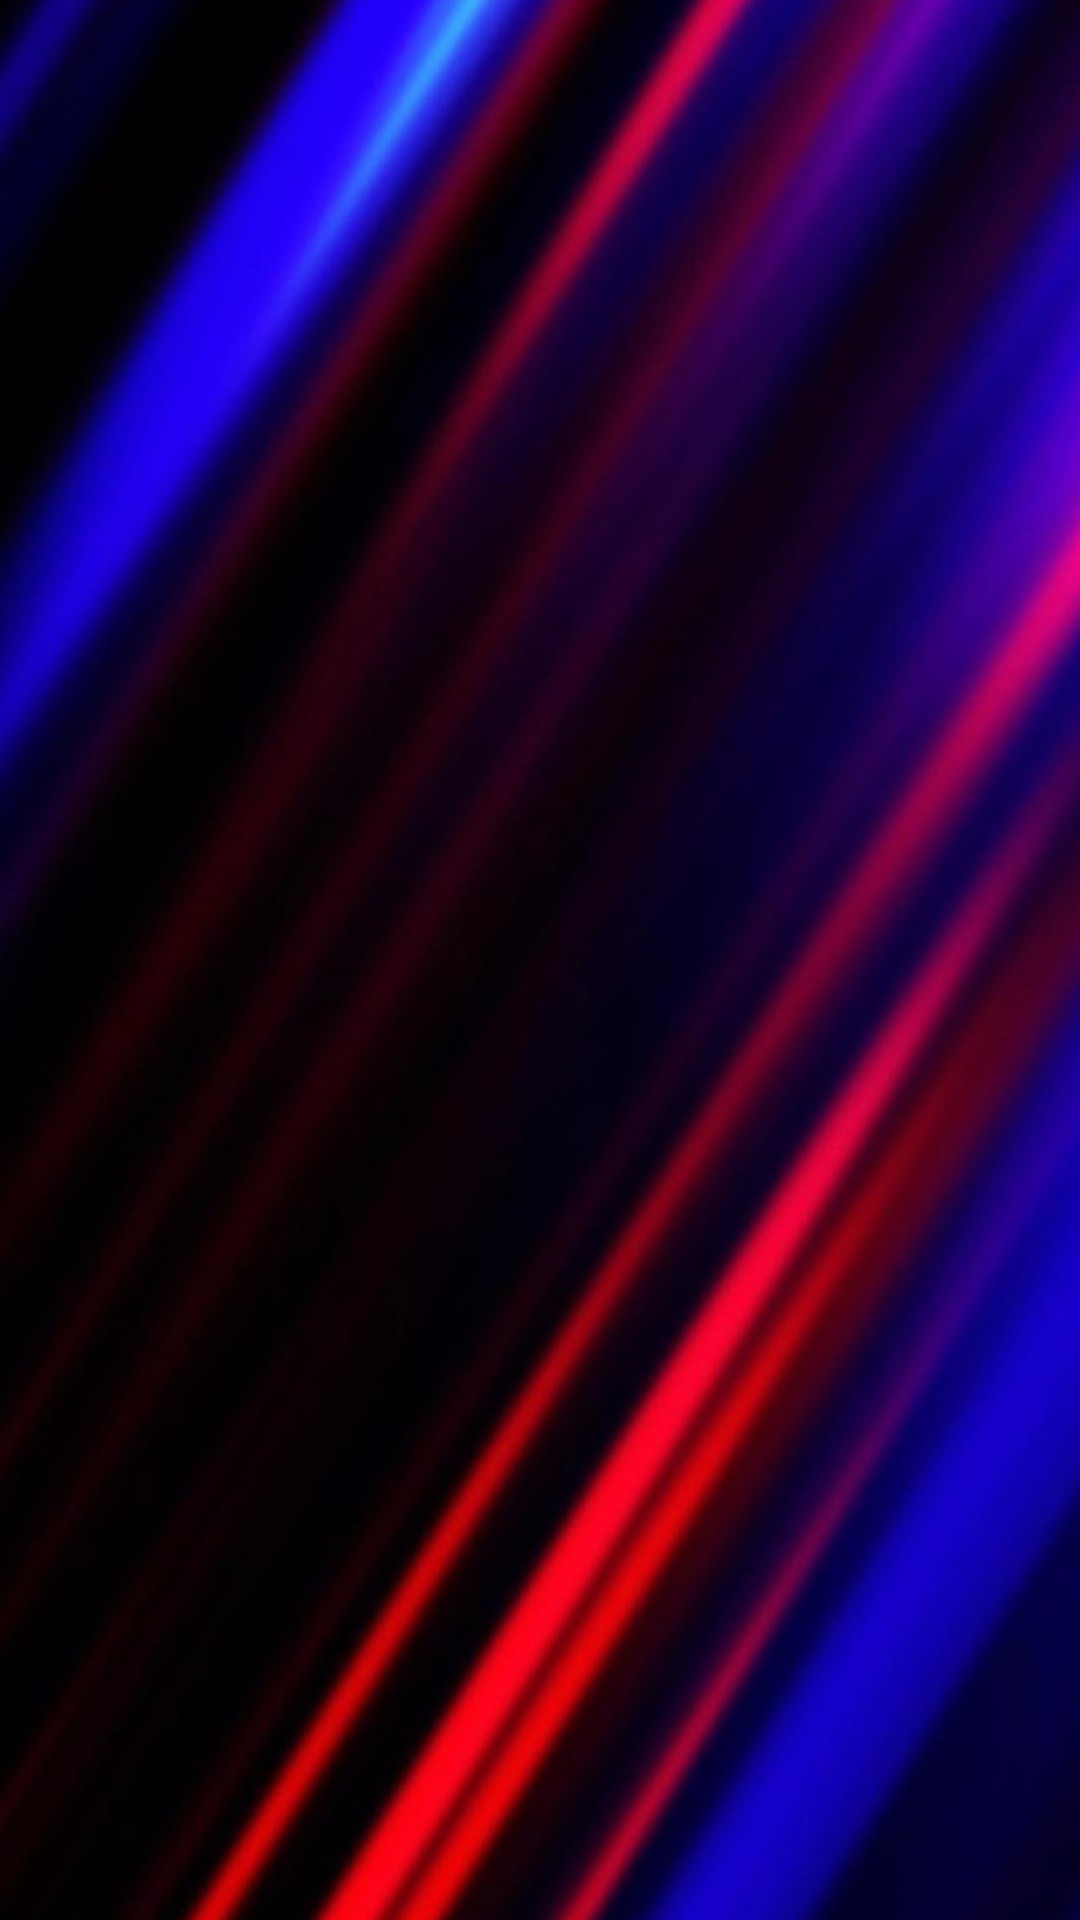 Colorful S4 Wallpapers 96, Samsung Galaxy S4 Backgrounds